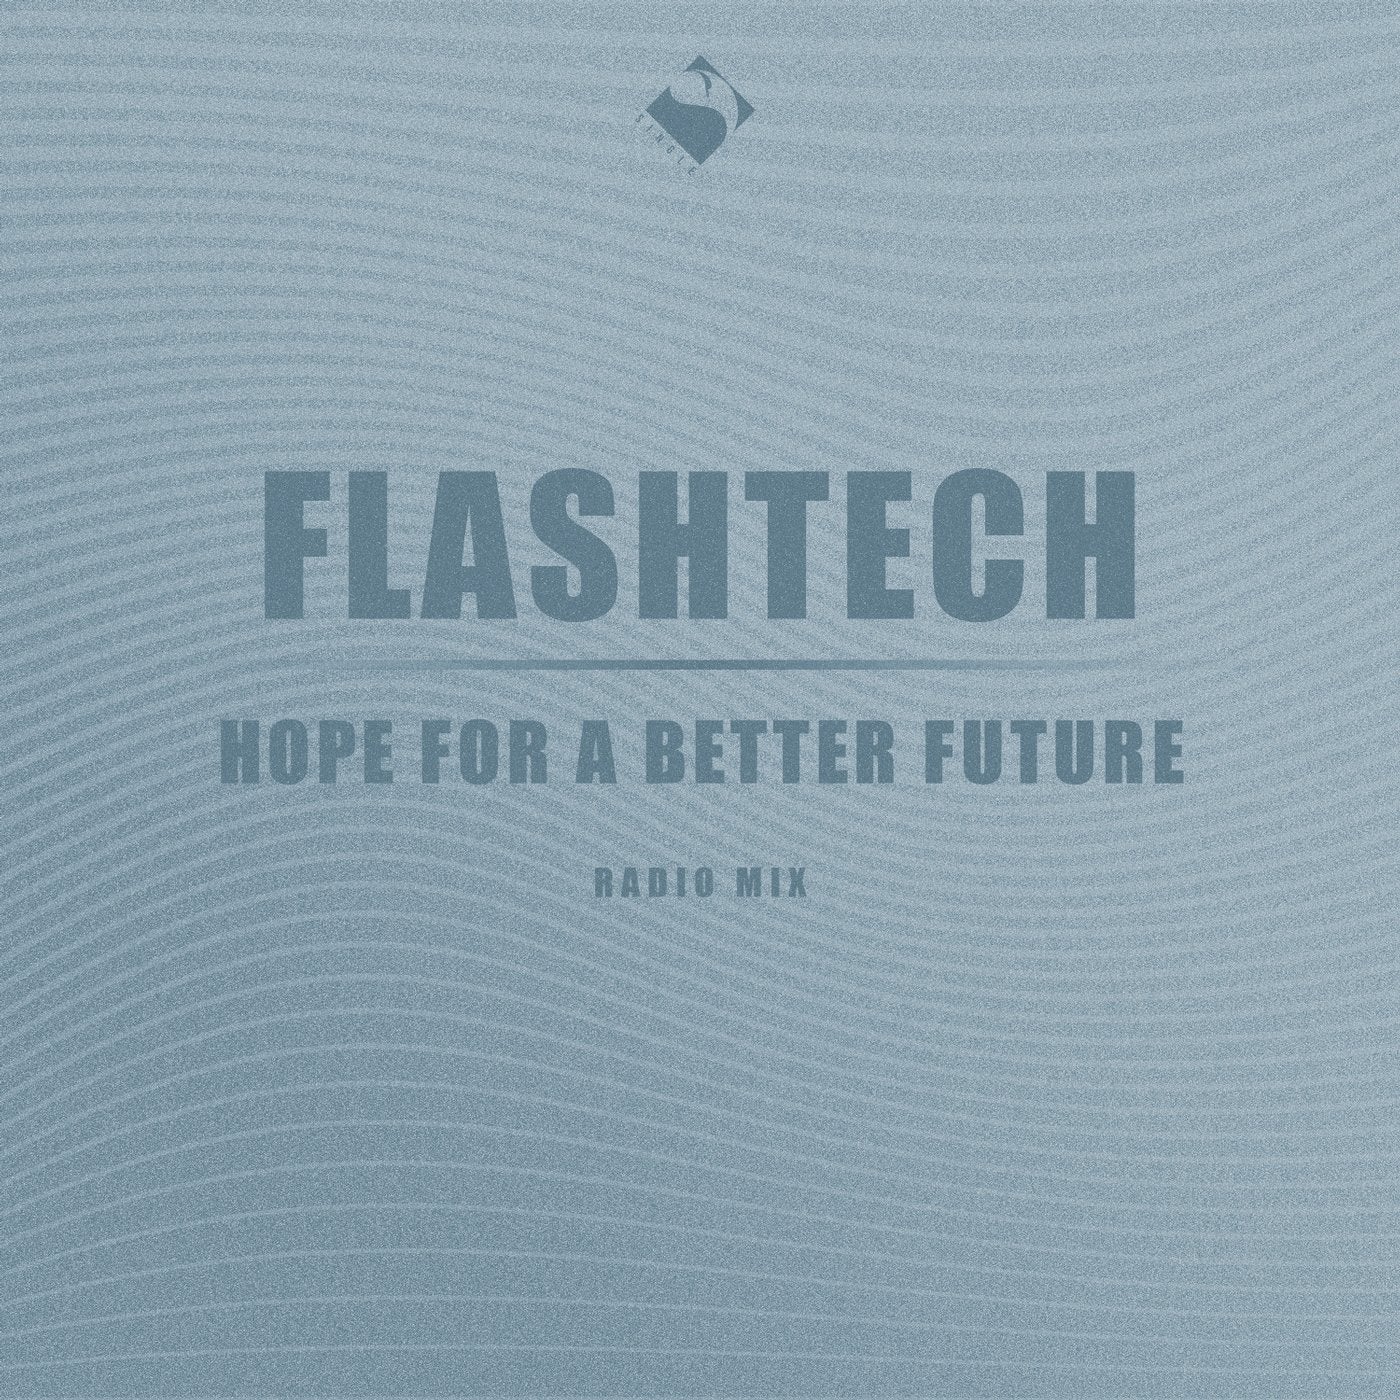 Hope for a Better Future (Radio Mix)